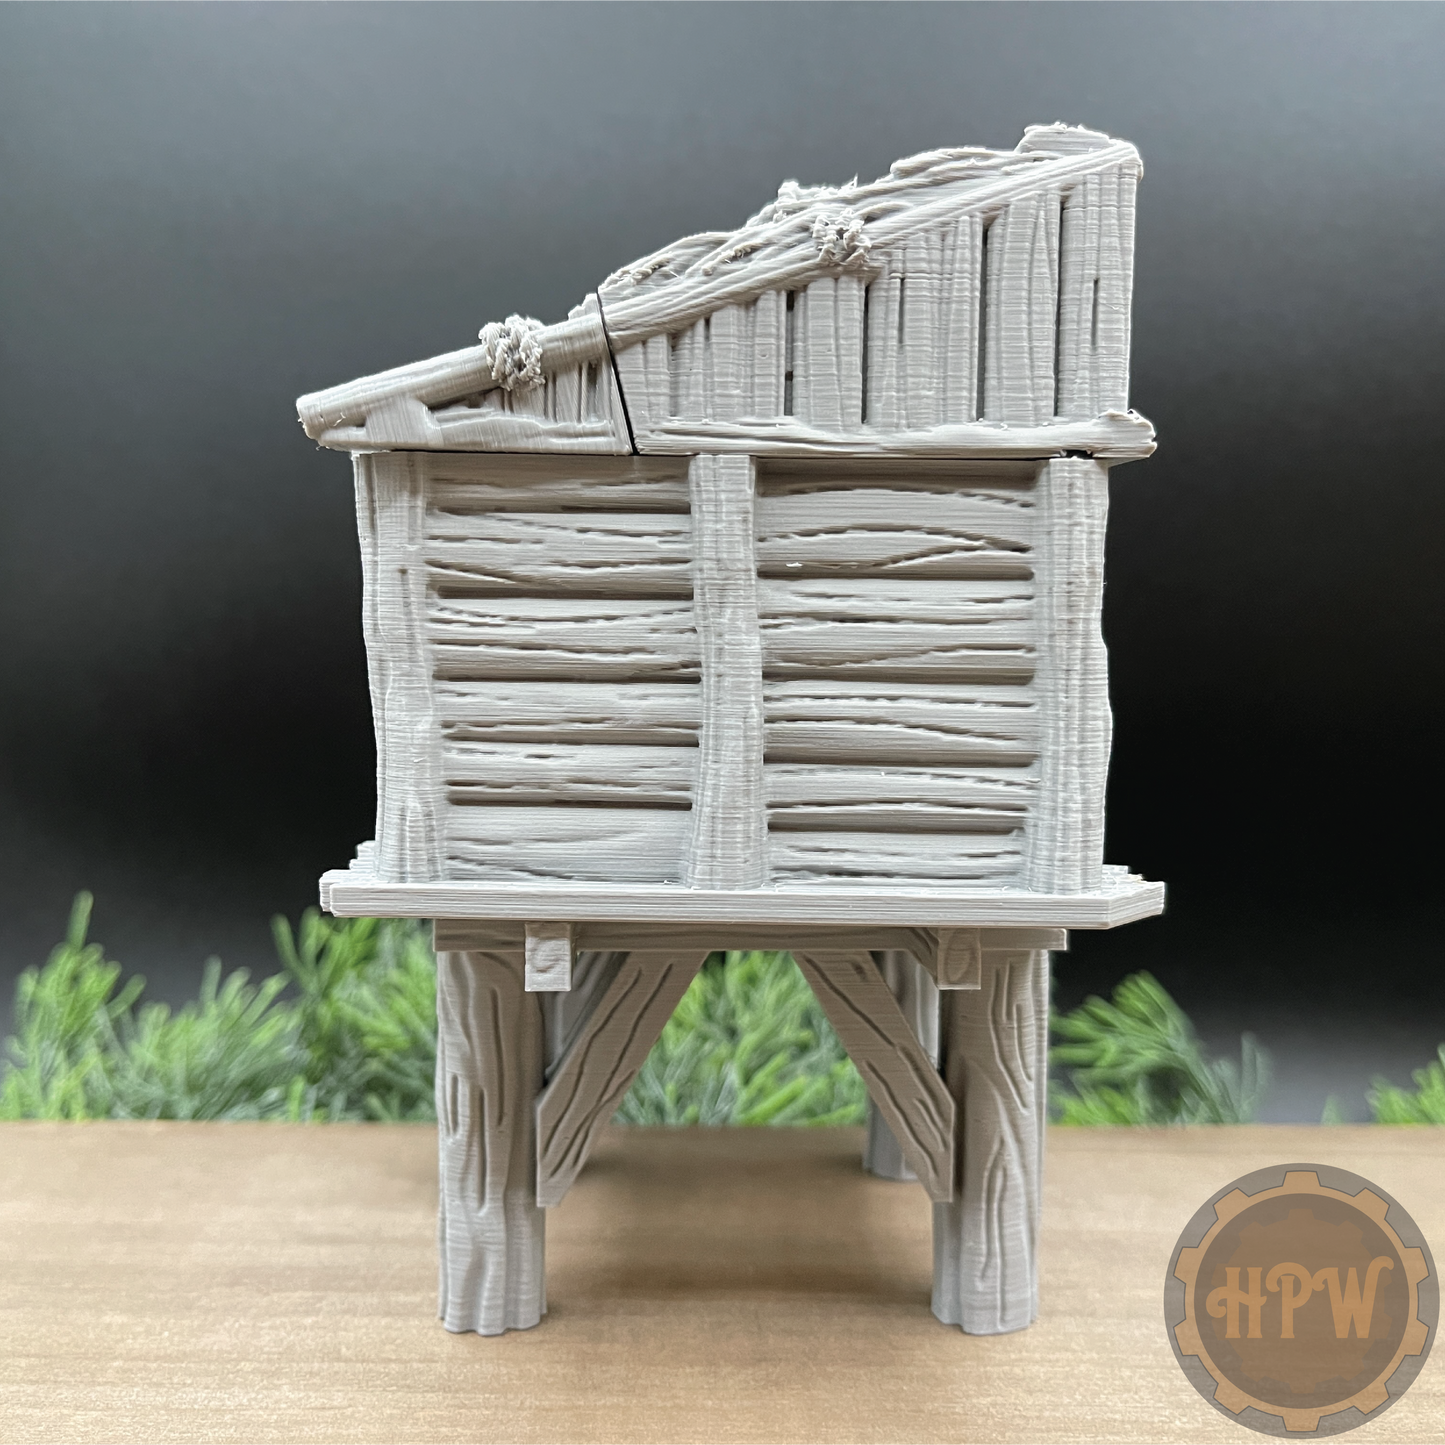 Wood Shed | Storage Hut | Miniature Gaming Terrain Kit | GameScape3D | Sea Stack Cove